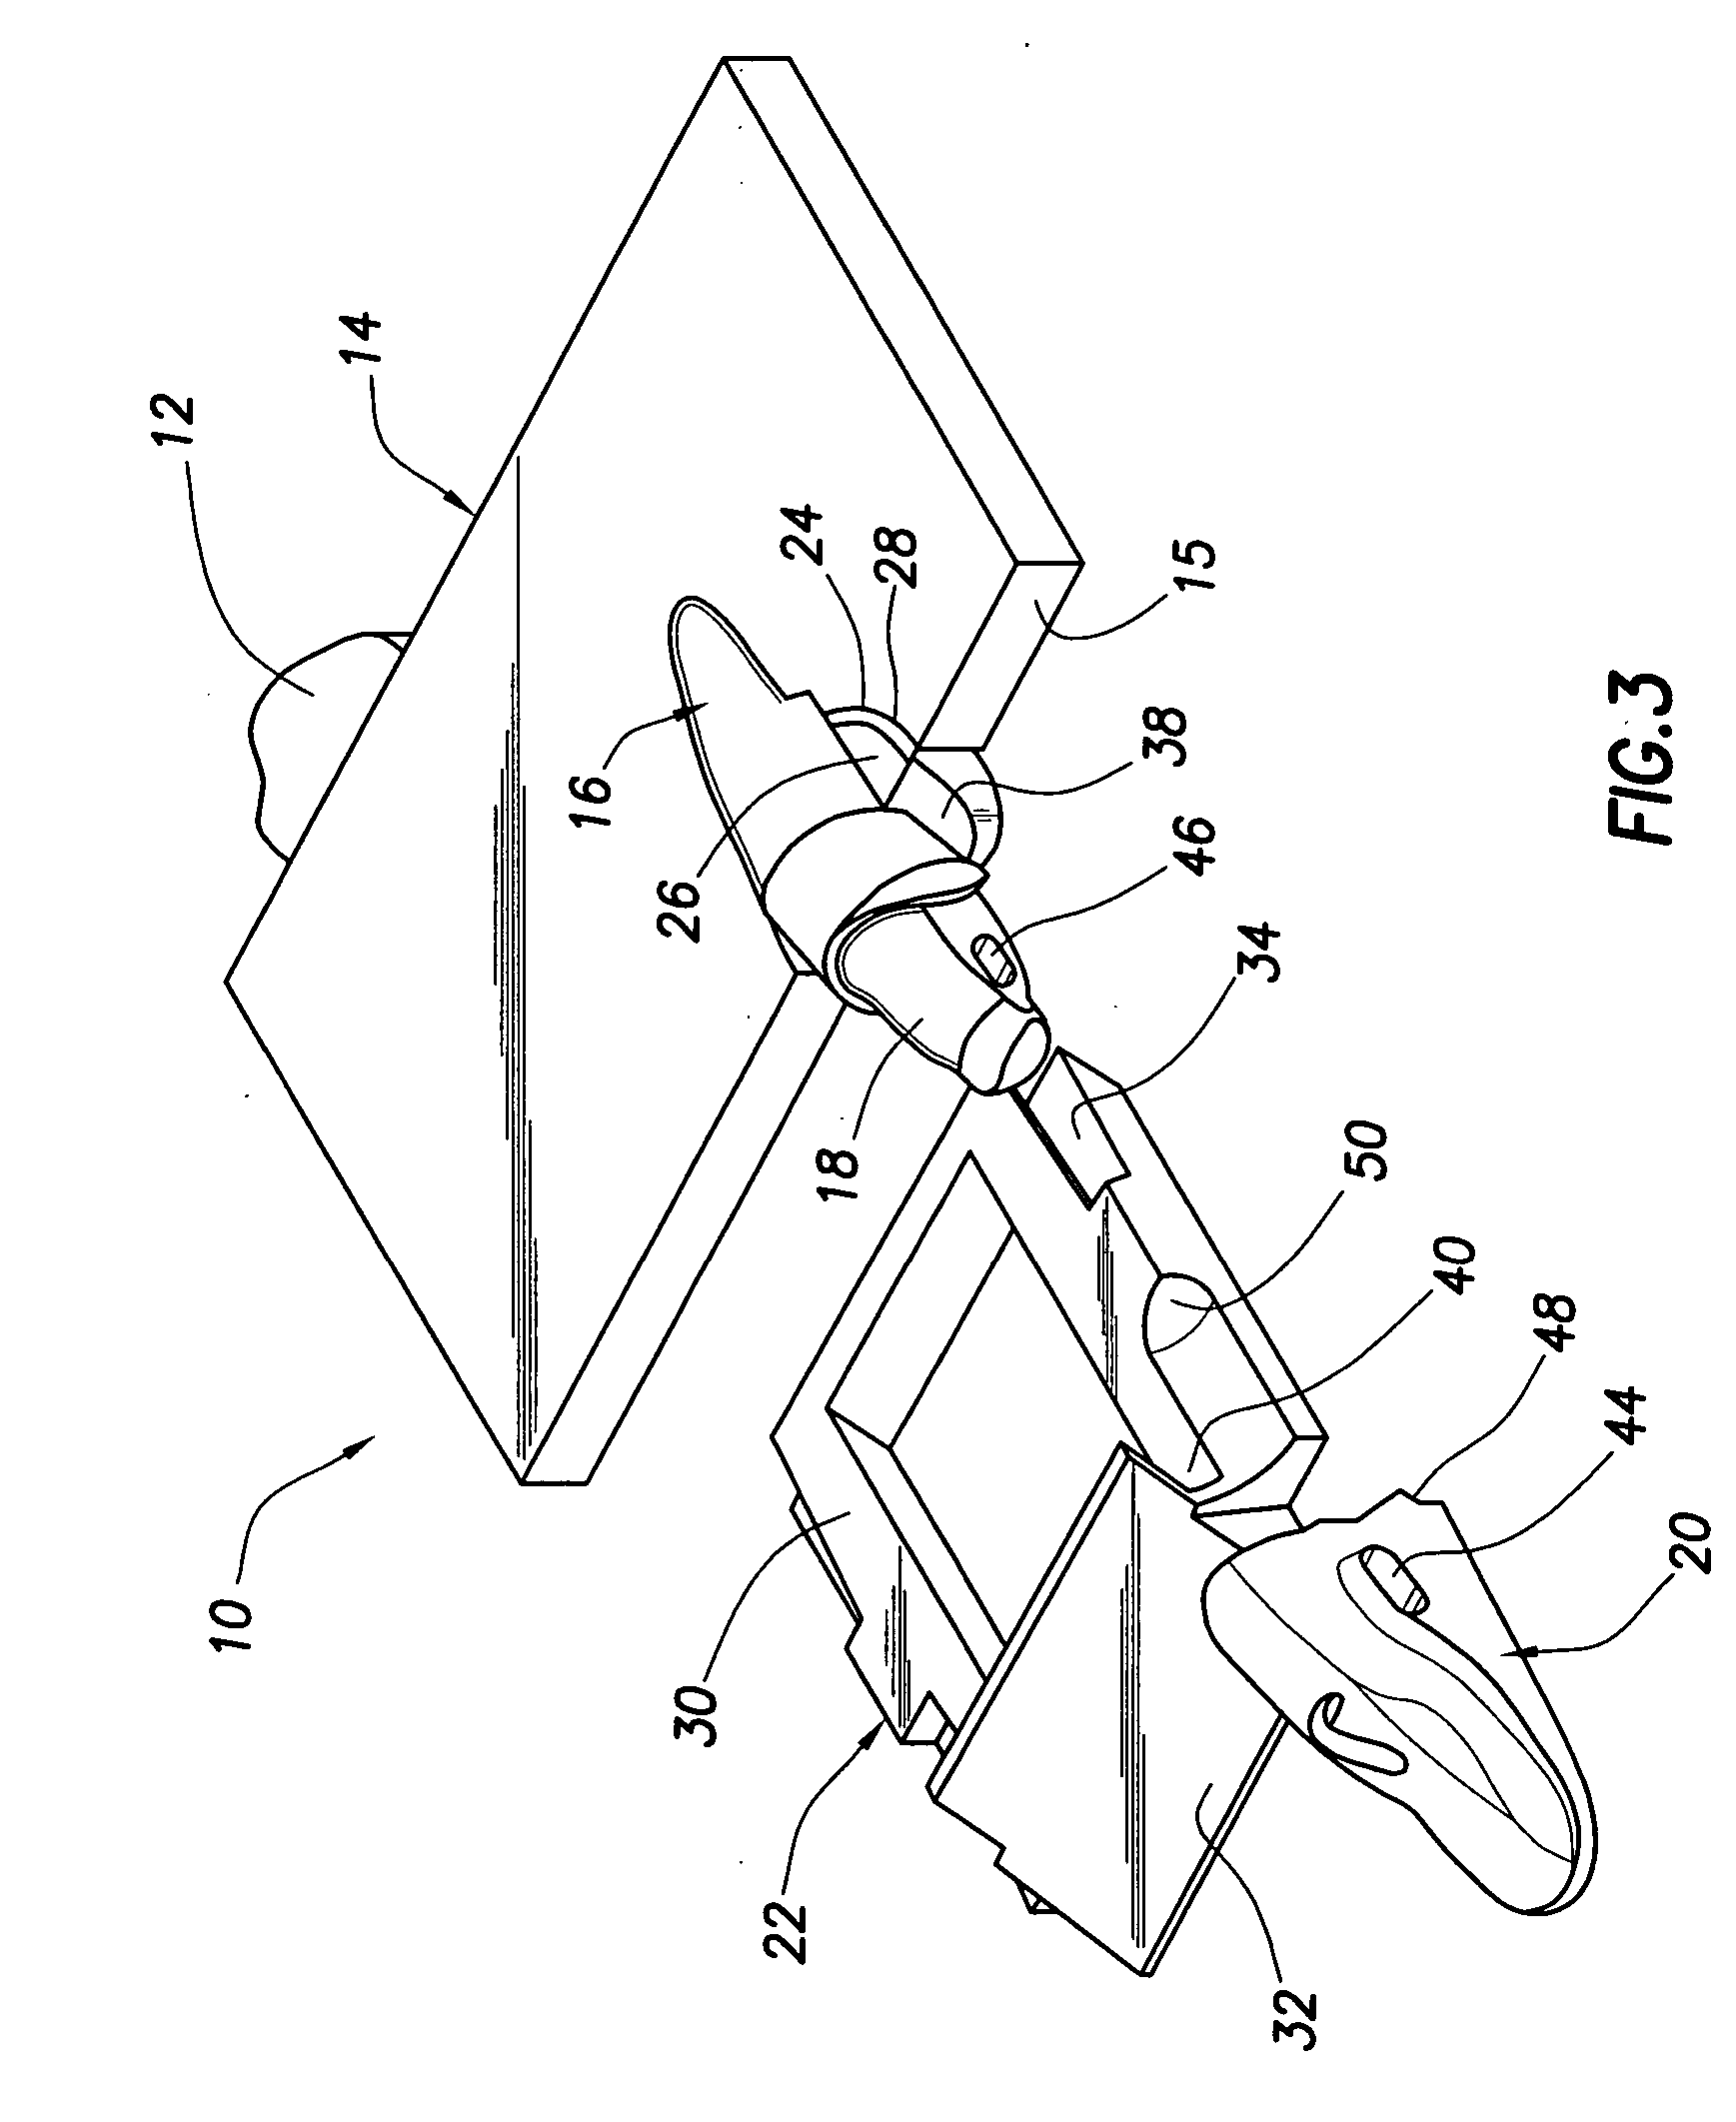 Excavating lip-mounted adapter and associated connection and shielding apparatus